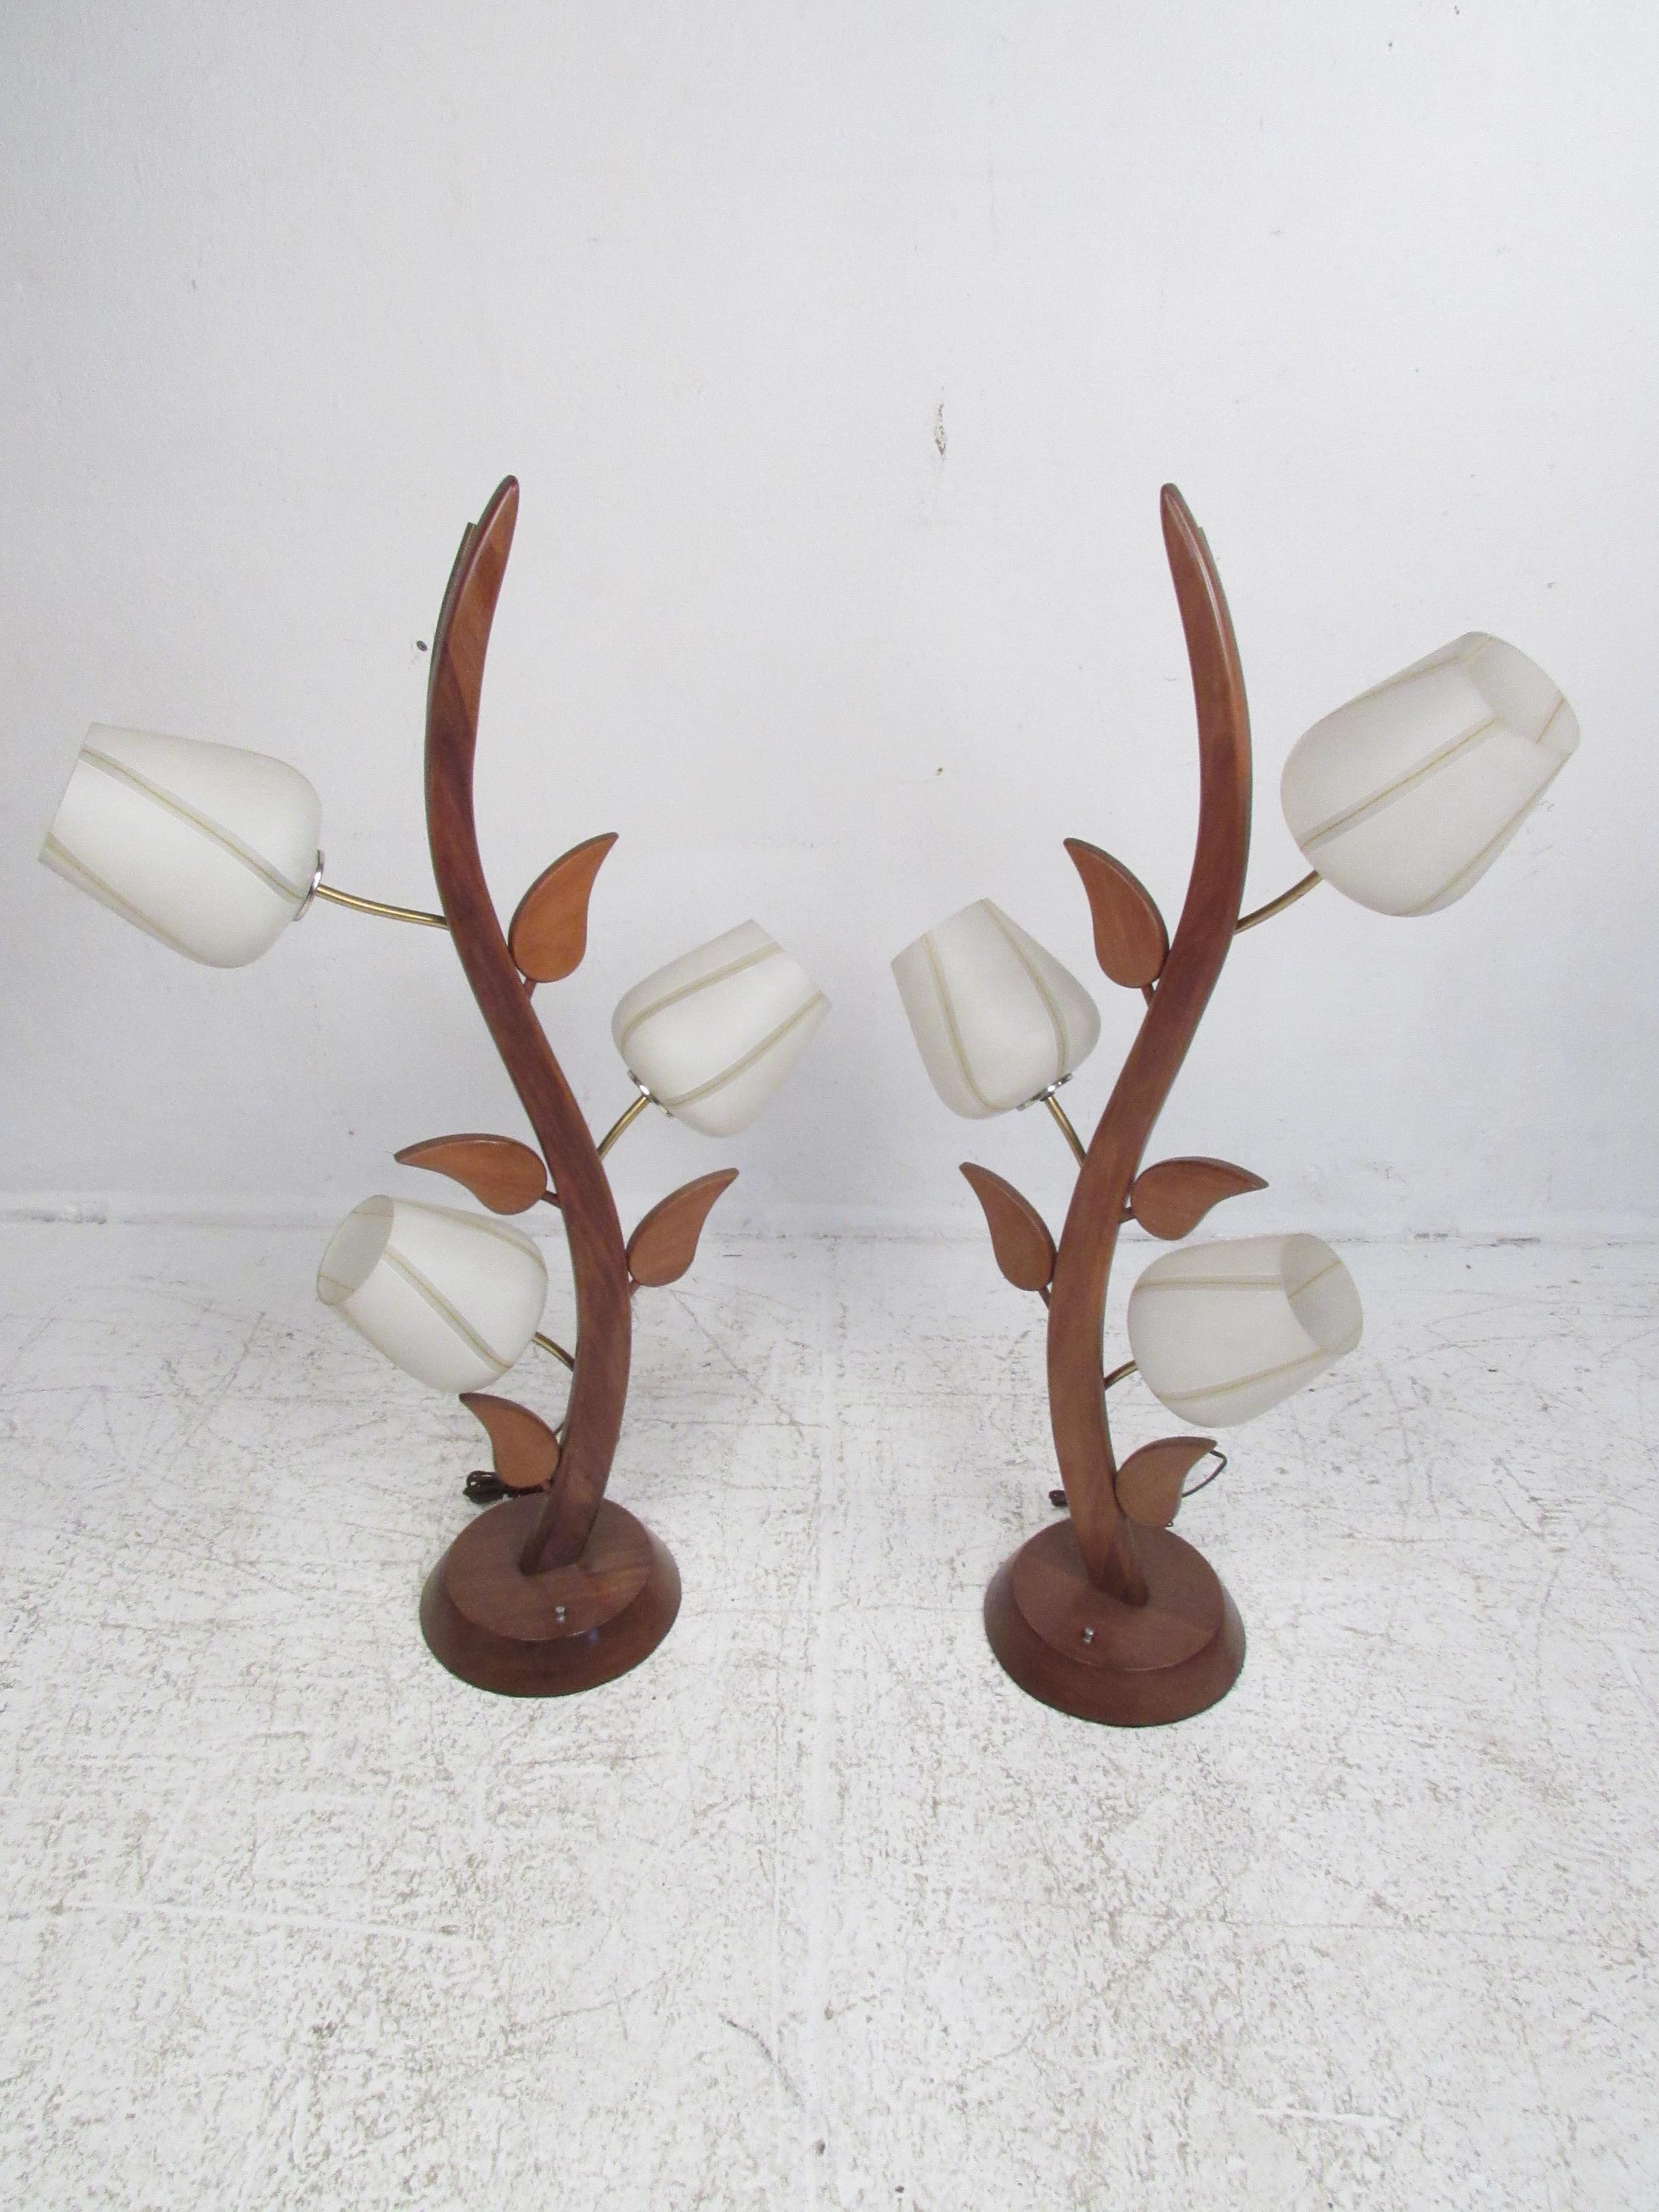 Very unusual pair of vintage lamps carved to resemble a flower or plant-life. Backed with a metal spine. Twist on/off mechanism. Re-wiring suggested for all vintage lighting or electrics. Please confirm item location with dealer (NJ or NY).